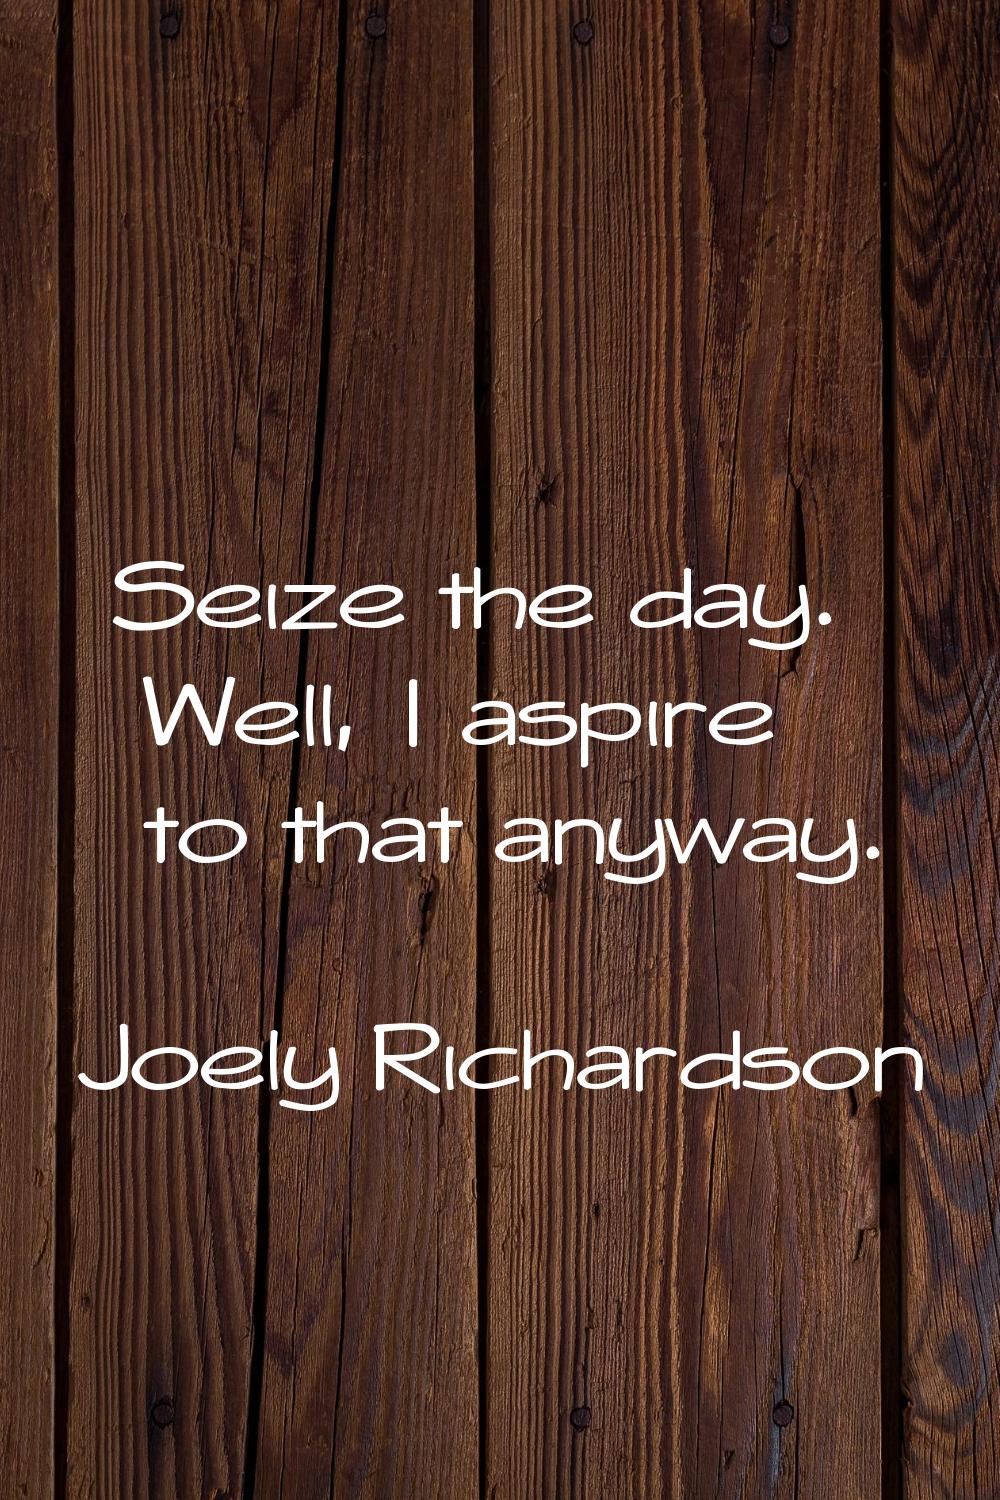 Seize the day. Well, I aspire to that anyway.